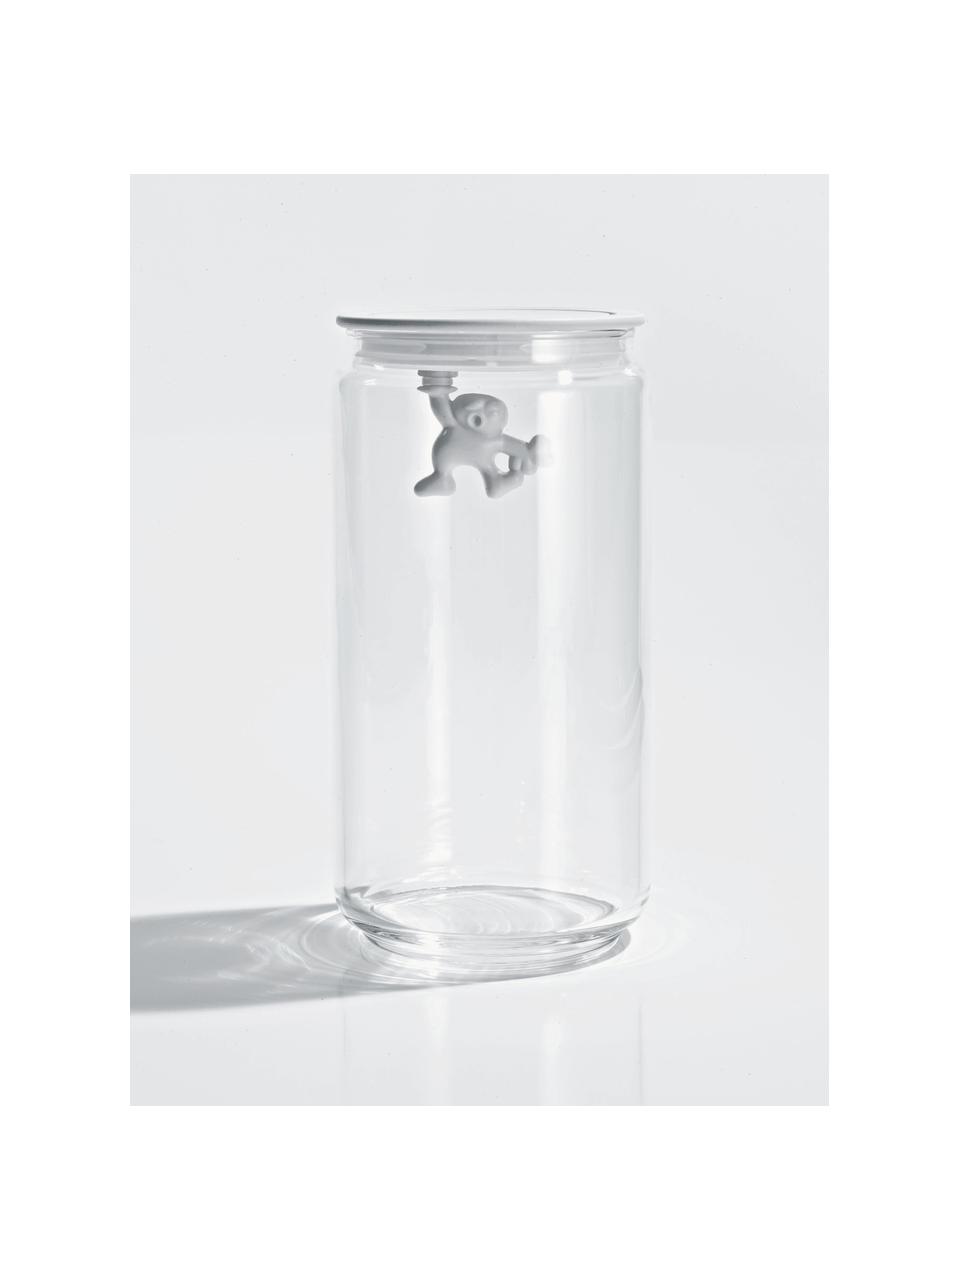 Opbergpot Gianni, H 21 cm, Glas, thermoplastische hars, Wit, transparant, Ø 11 x H 21 cm